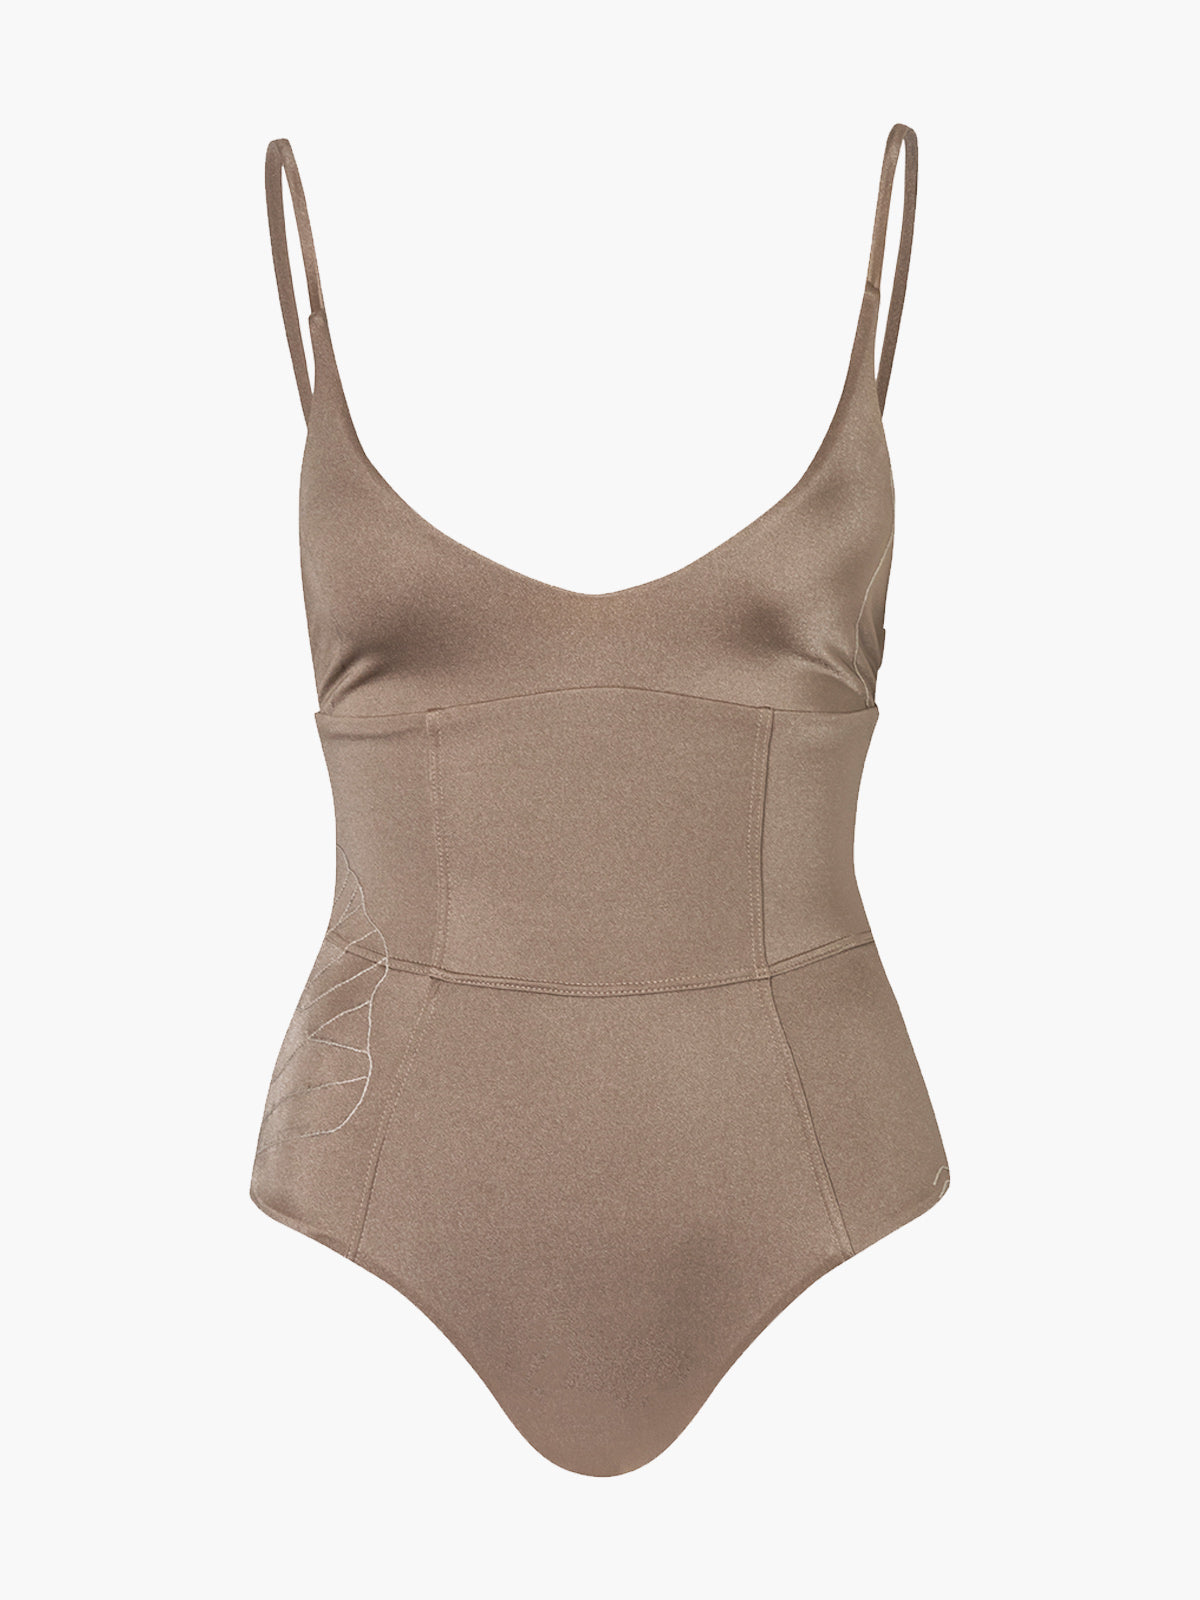 Embroidered Santo Steffano Maillot | Toffee